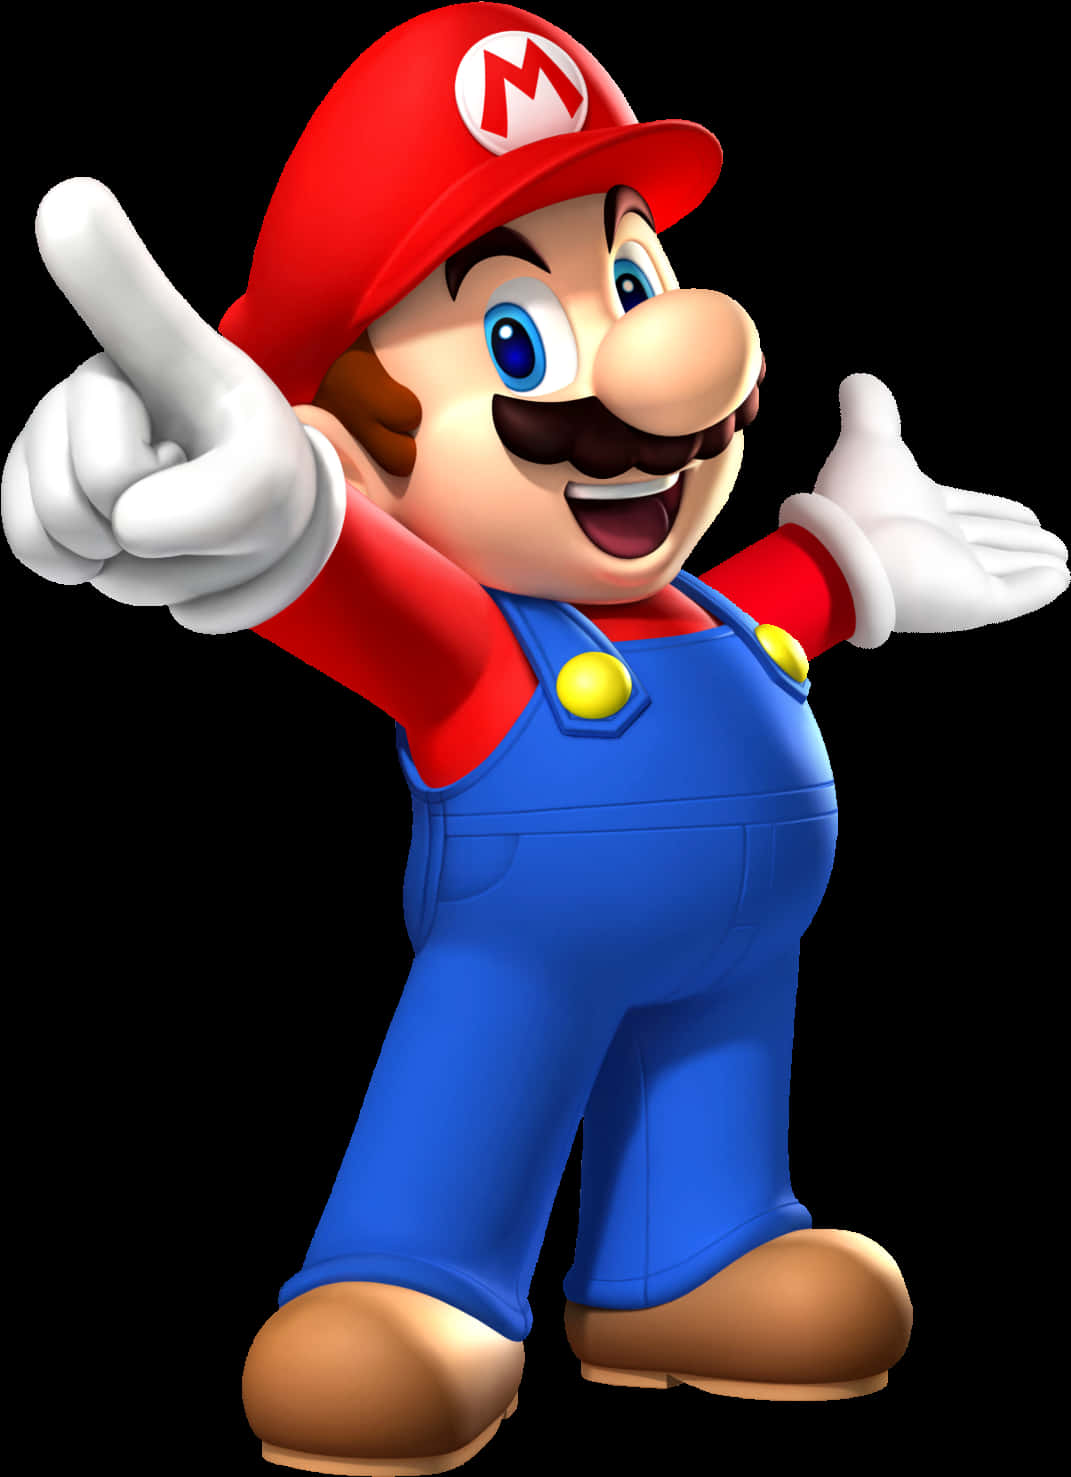 Super Mario Pointing Graphic PNG